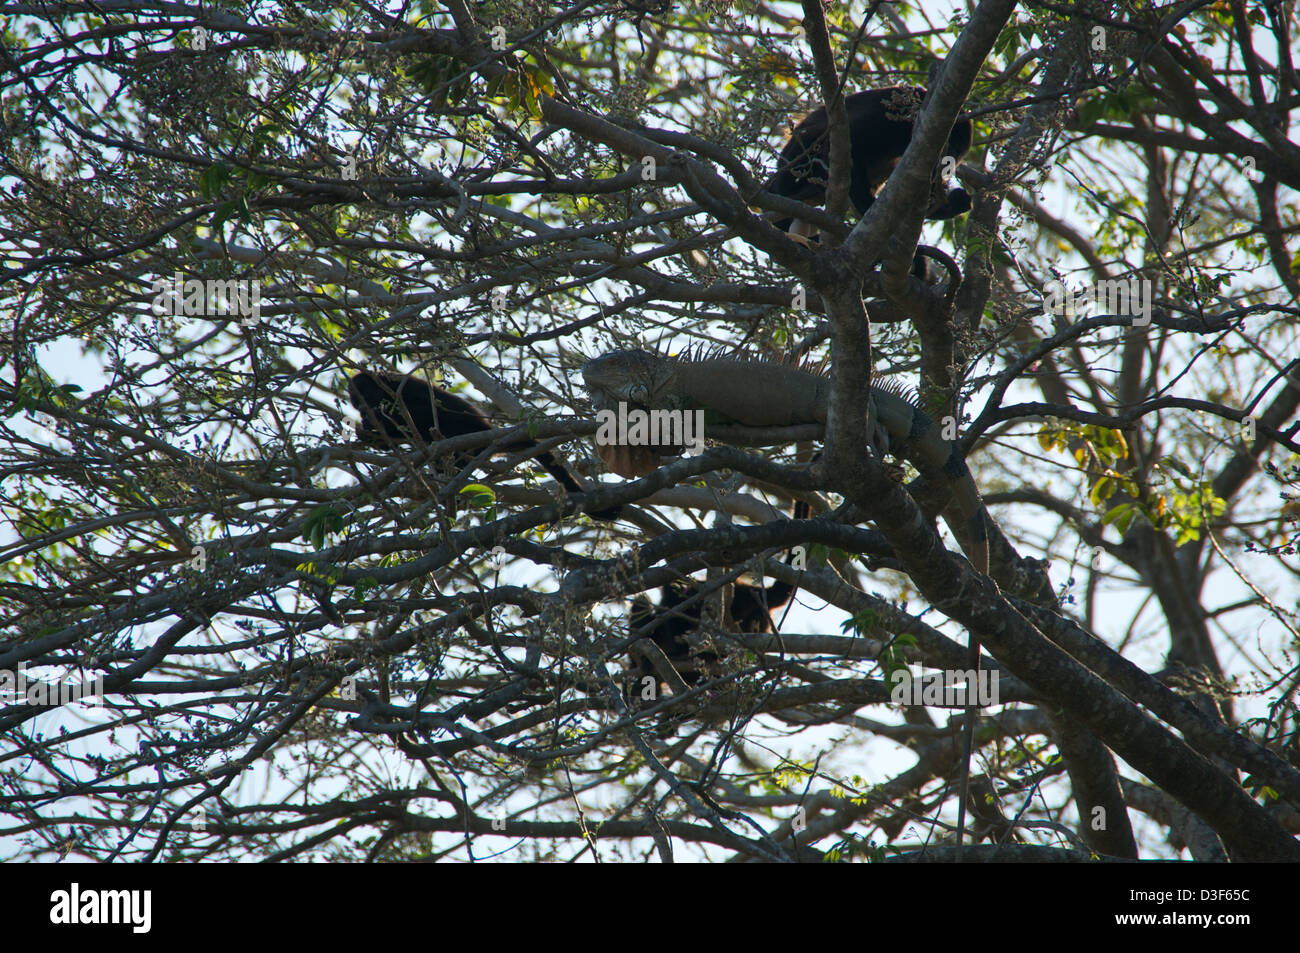 A huge Iguana in the tree with howler monkeys. Stock Photo